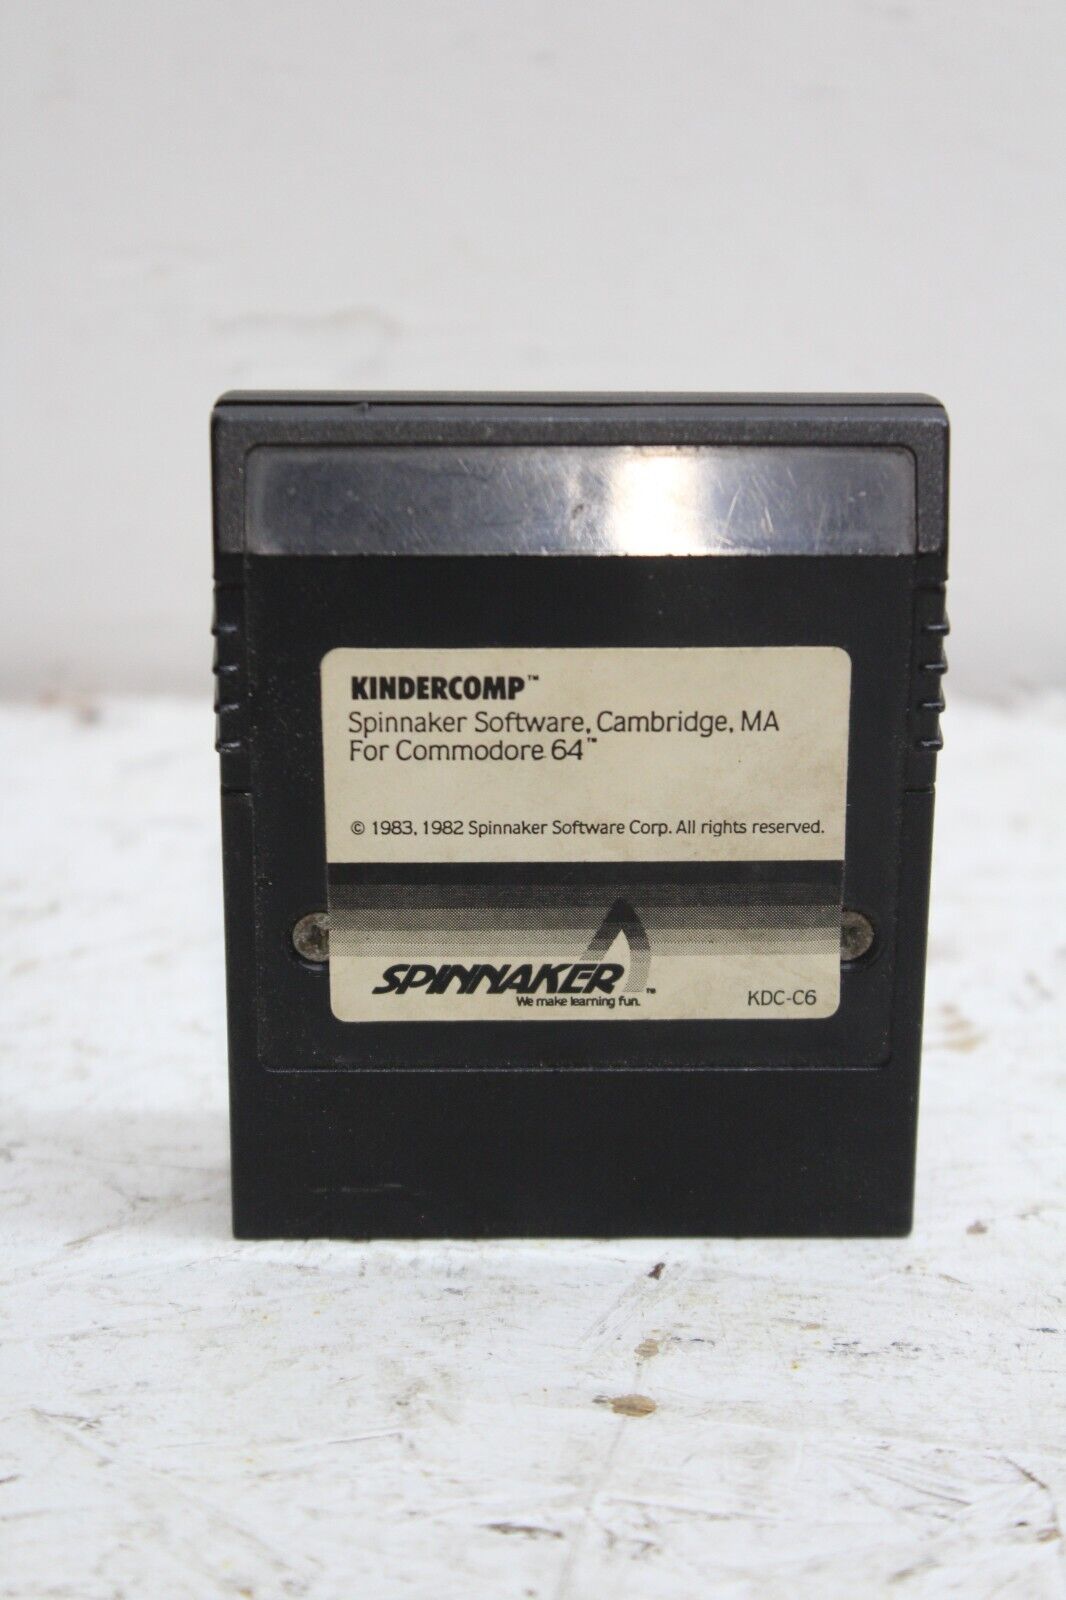 KinderComp by Spinnaker Software for COMMODORE 64